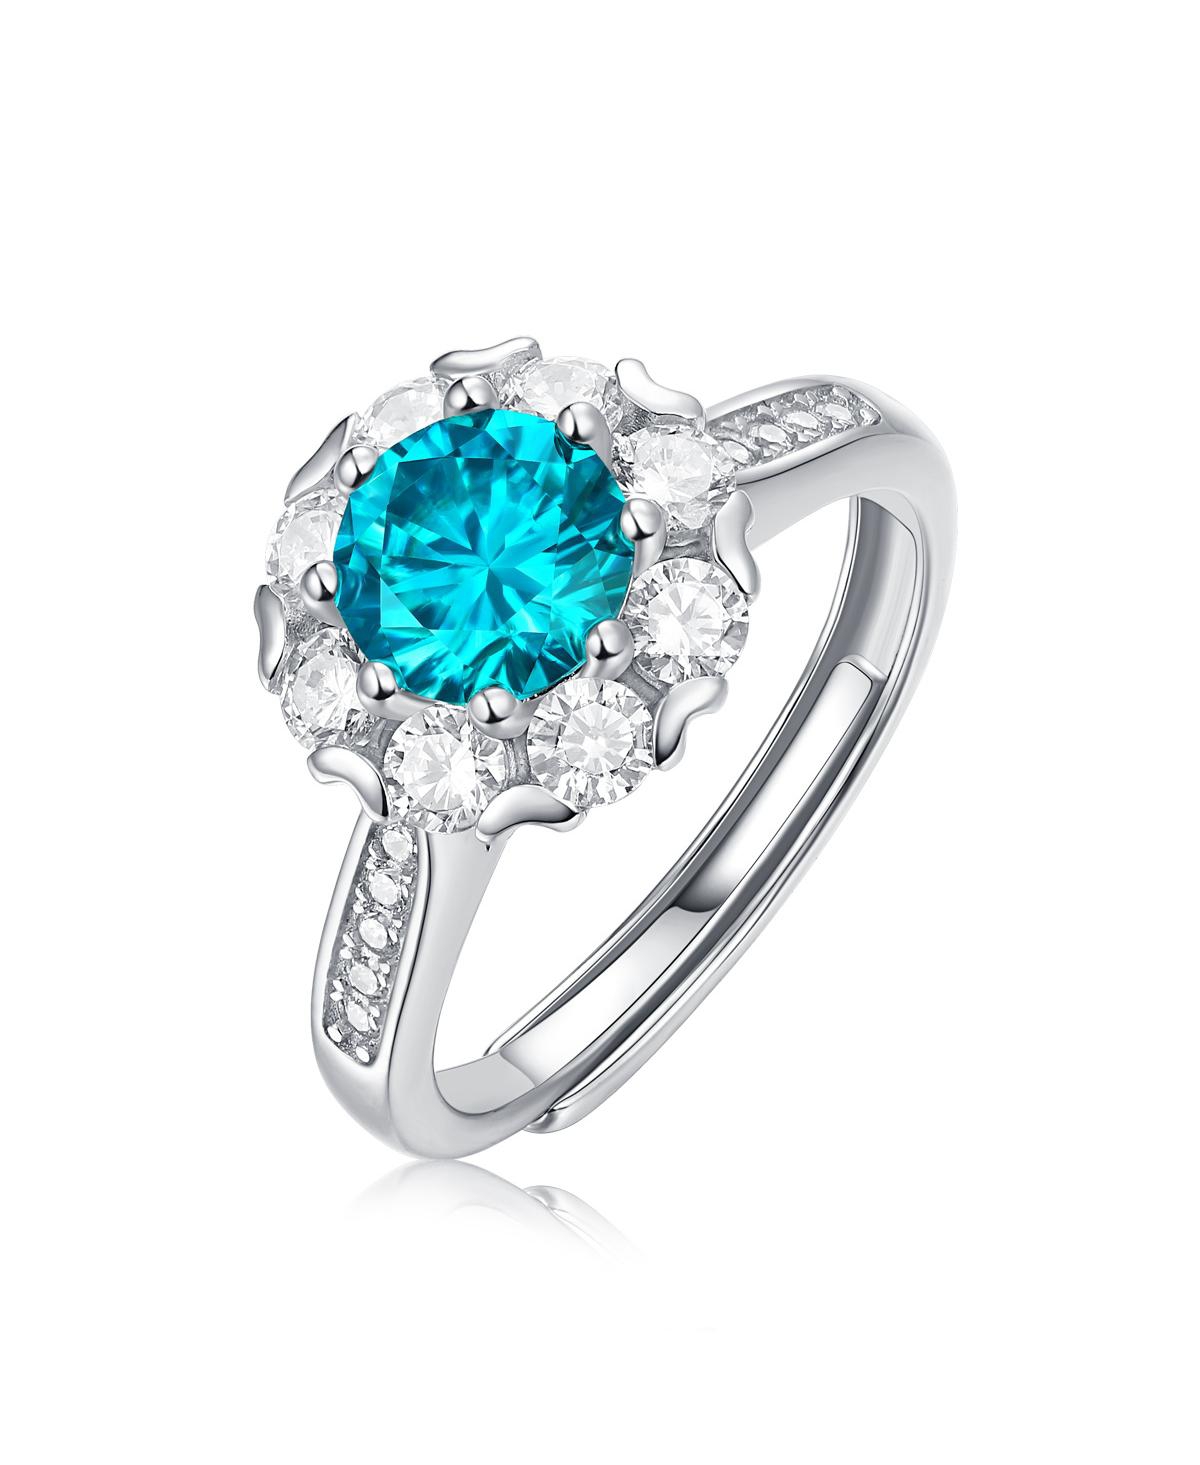 STELLA VALENTINO STERLING SILVER WHITE GOLD PLATED WITH 1.8CTW BLUE TOPAZ & LAB CREATED MOISSANITE HALO CLUSTER ADJUS